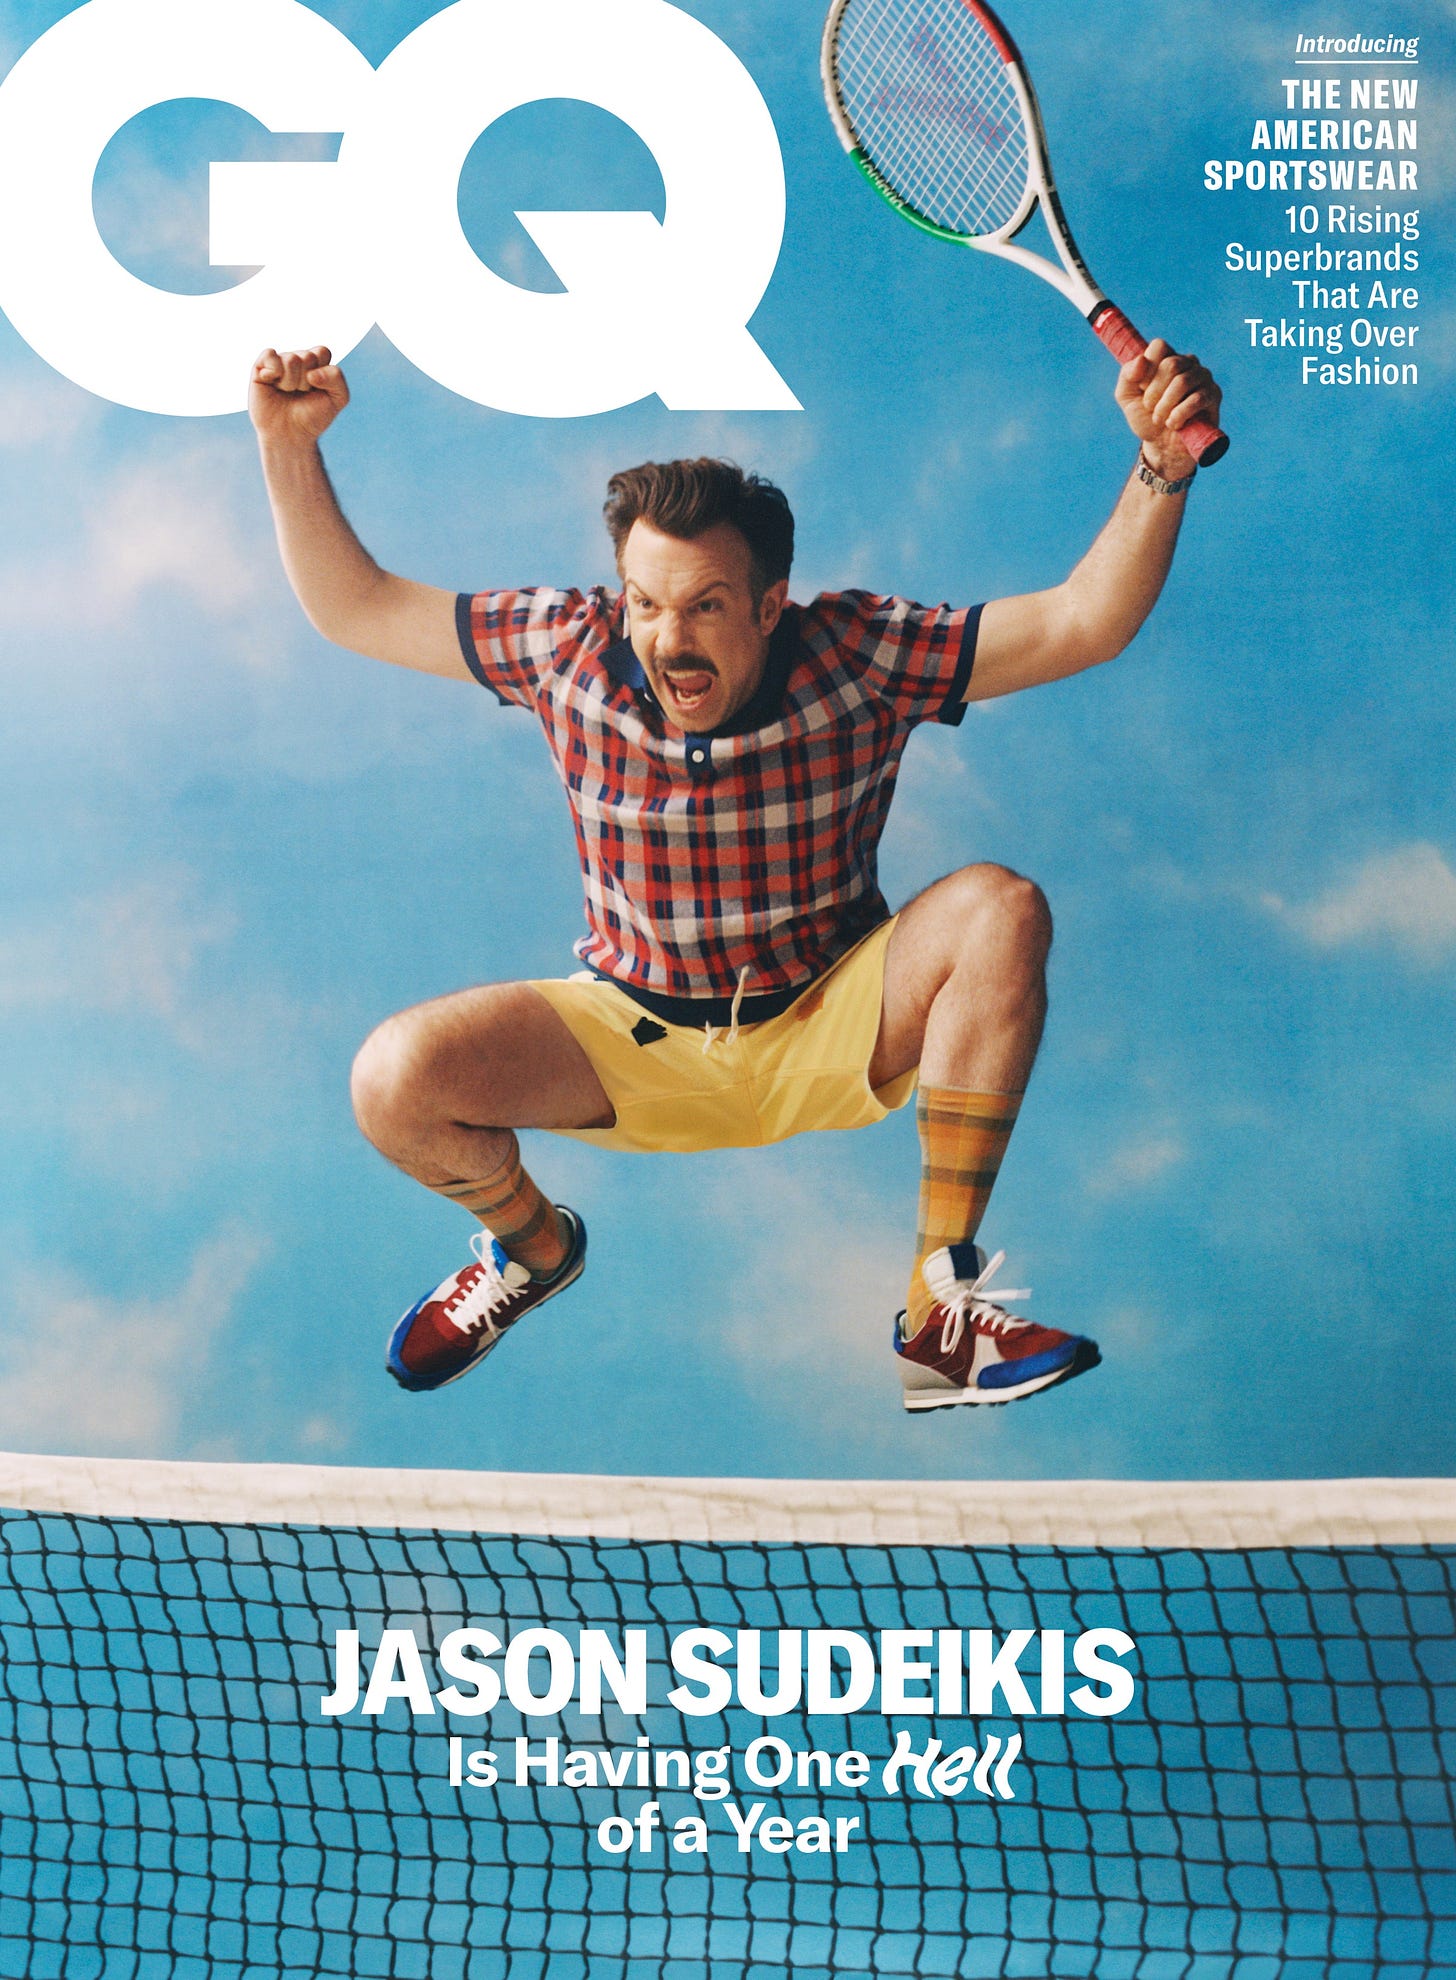 Jason Sudeikis on Ted Lasso, SNL, and “Landing Like an Avenger” After  Heartbreak | GQ